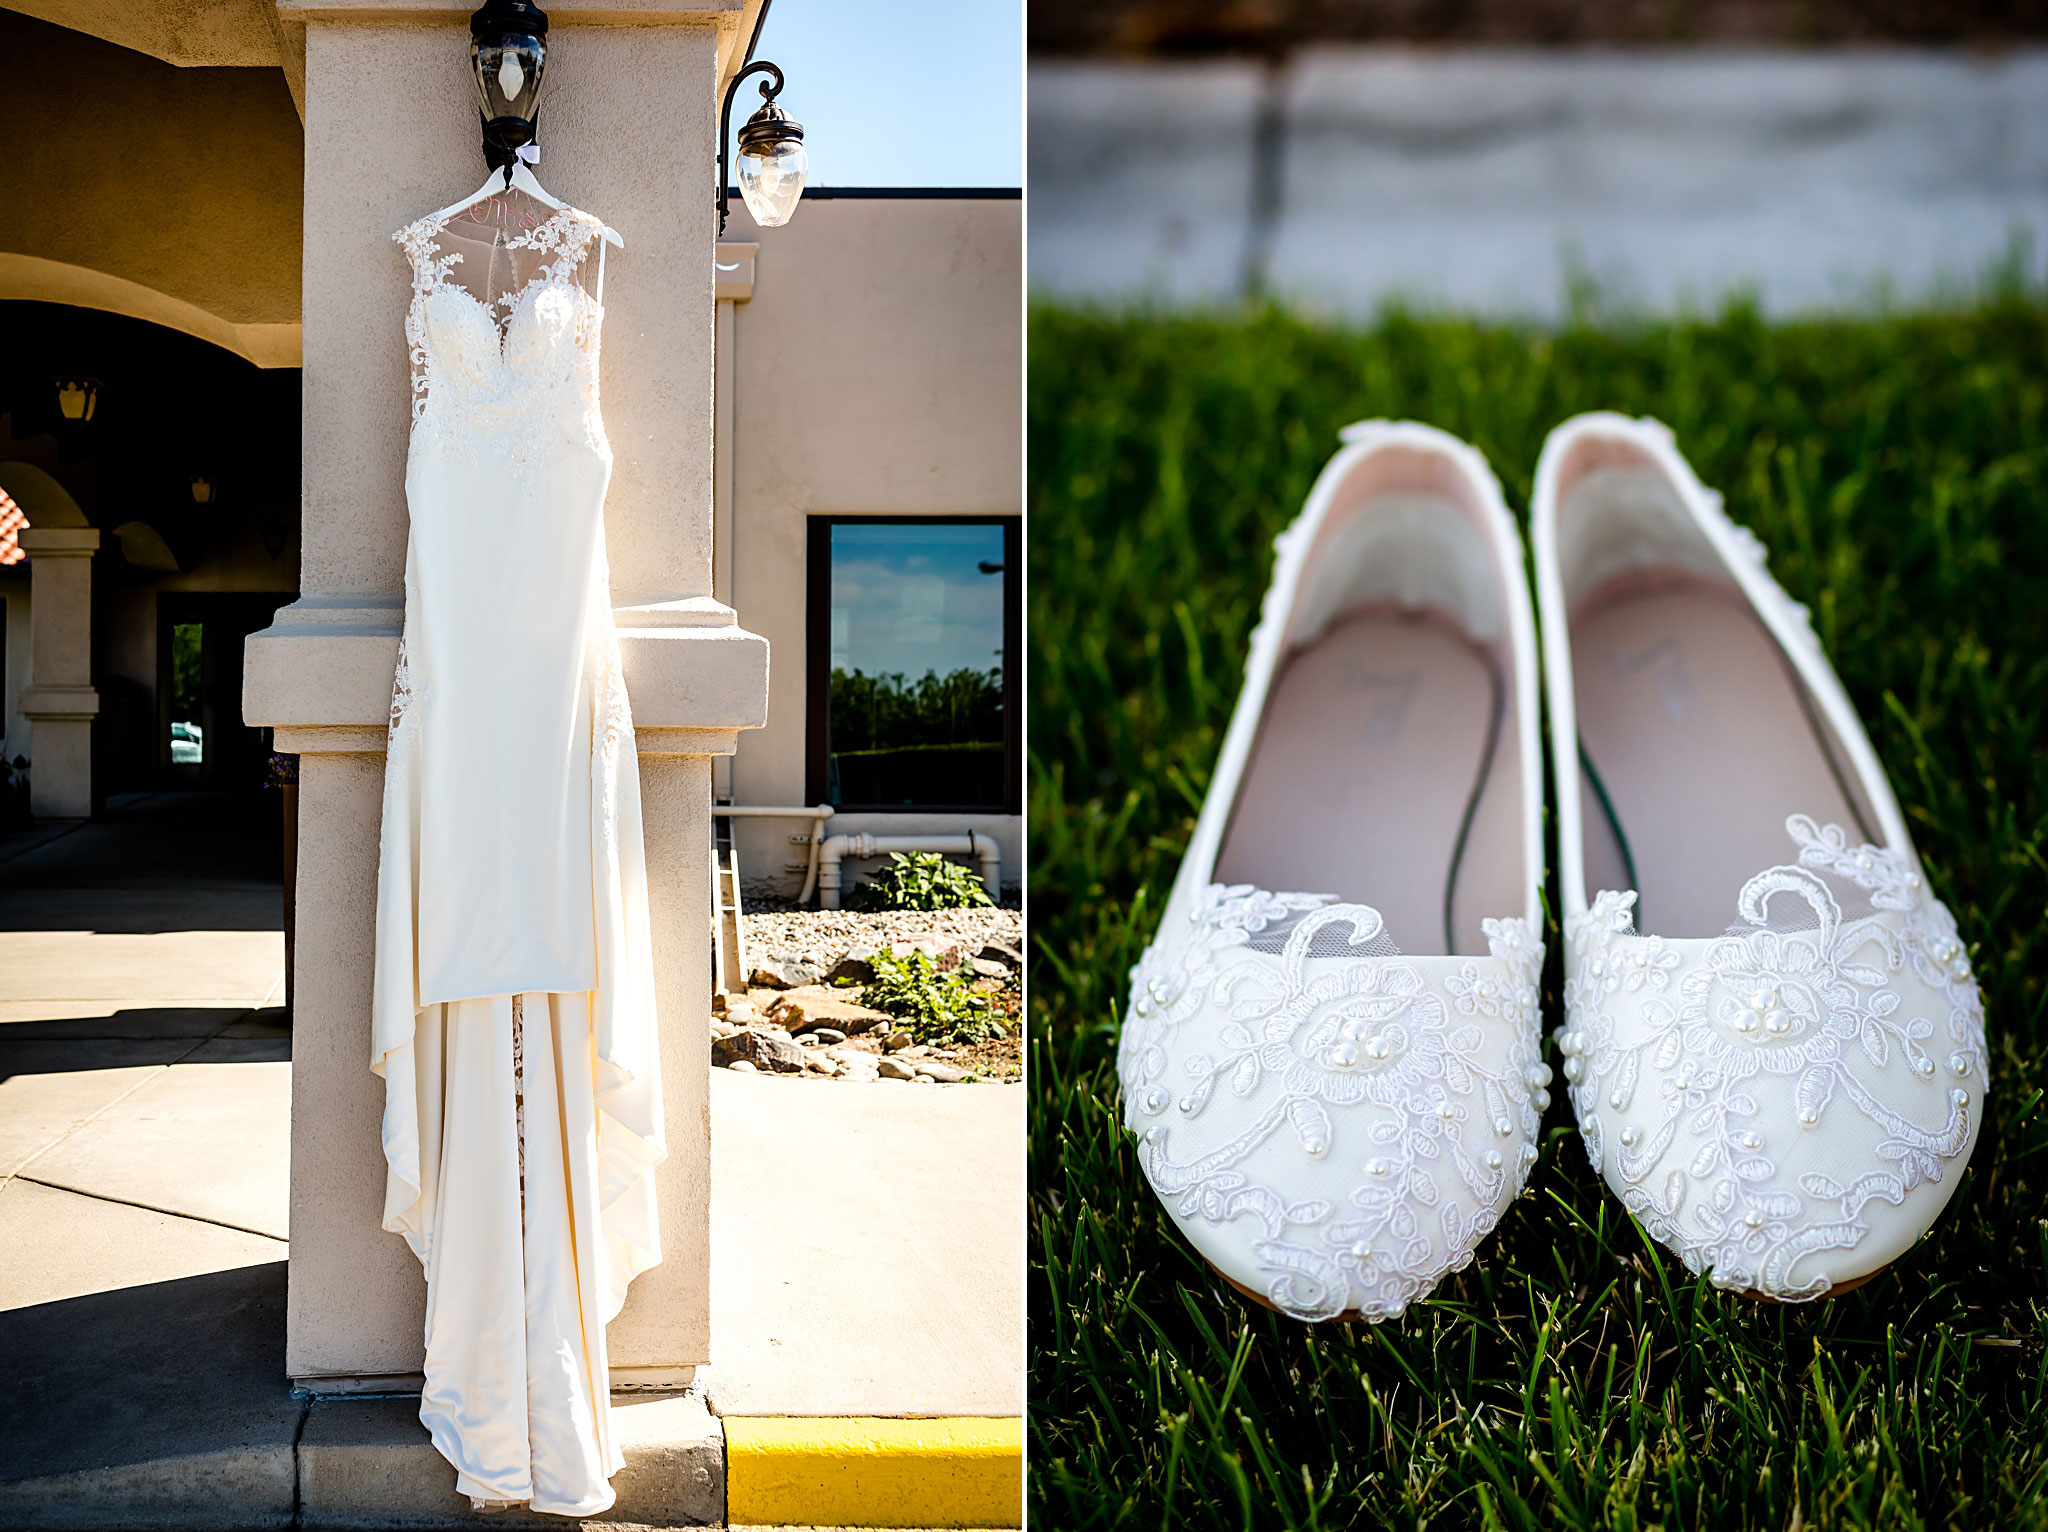 Wedding dress and shoes. Kelli & Jason's golf course wedding at The Ranch Country Club by Colorado Wedding Photographer Jennifer Garza, Small wedding ideas, Intimate wedding, Golf Course Wedding, Country Club Wedding, Summer Wedding, Golf Wedding, Wedding planning, Colorado Wedding Photographer, Colorado Elopement Photographer, Colorado Elopement, Colorado Wedding, Elope in Colorado, Denver Wedding Photographer, Denver Wedding, Wedding Inspiration, Summer Wedding Inspiration, Colorado Bride